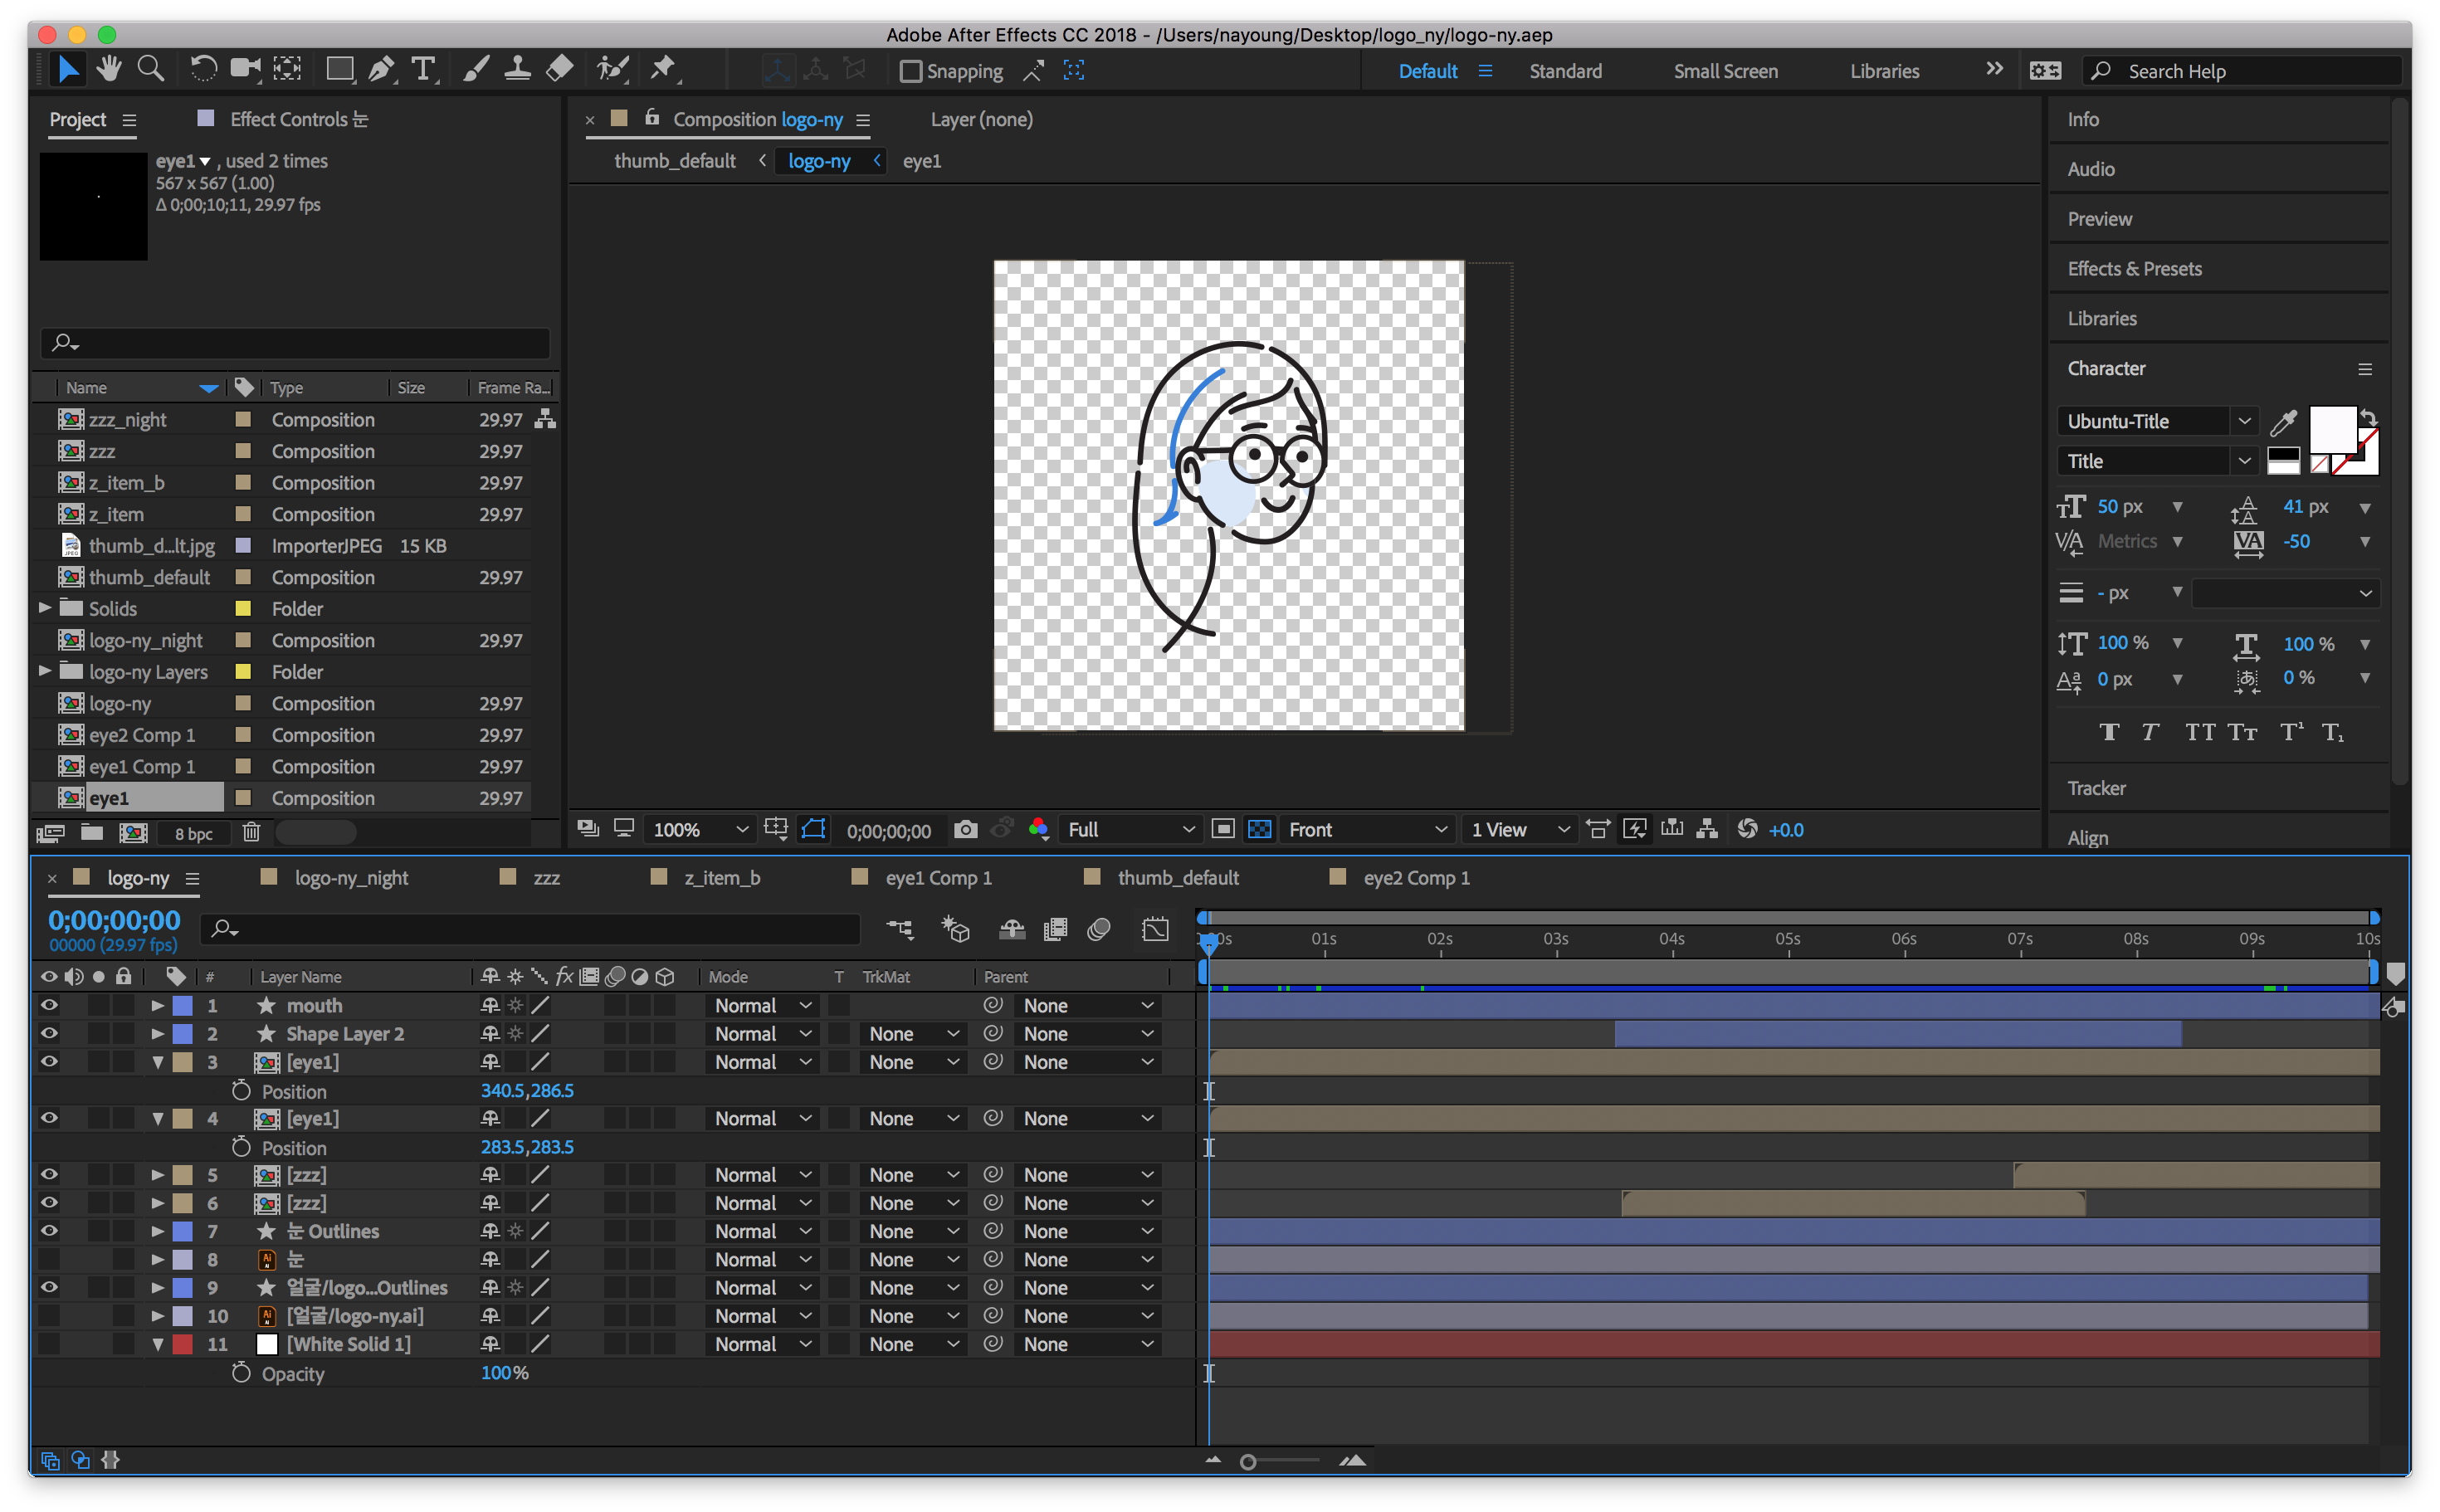 Effect control after effects. Bodymovin after Effects. Lottie after Effects. Lottie from after Effects.